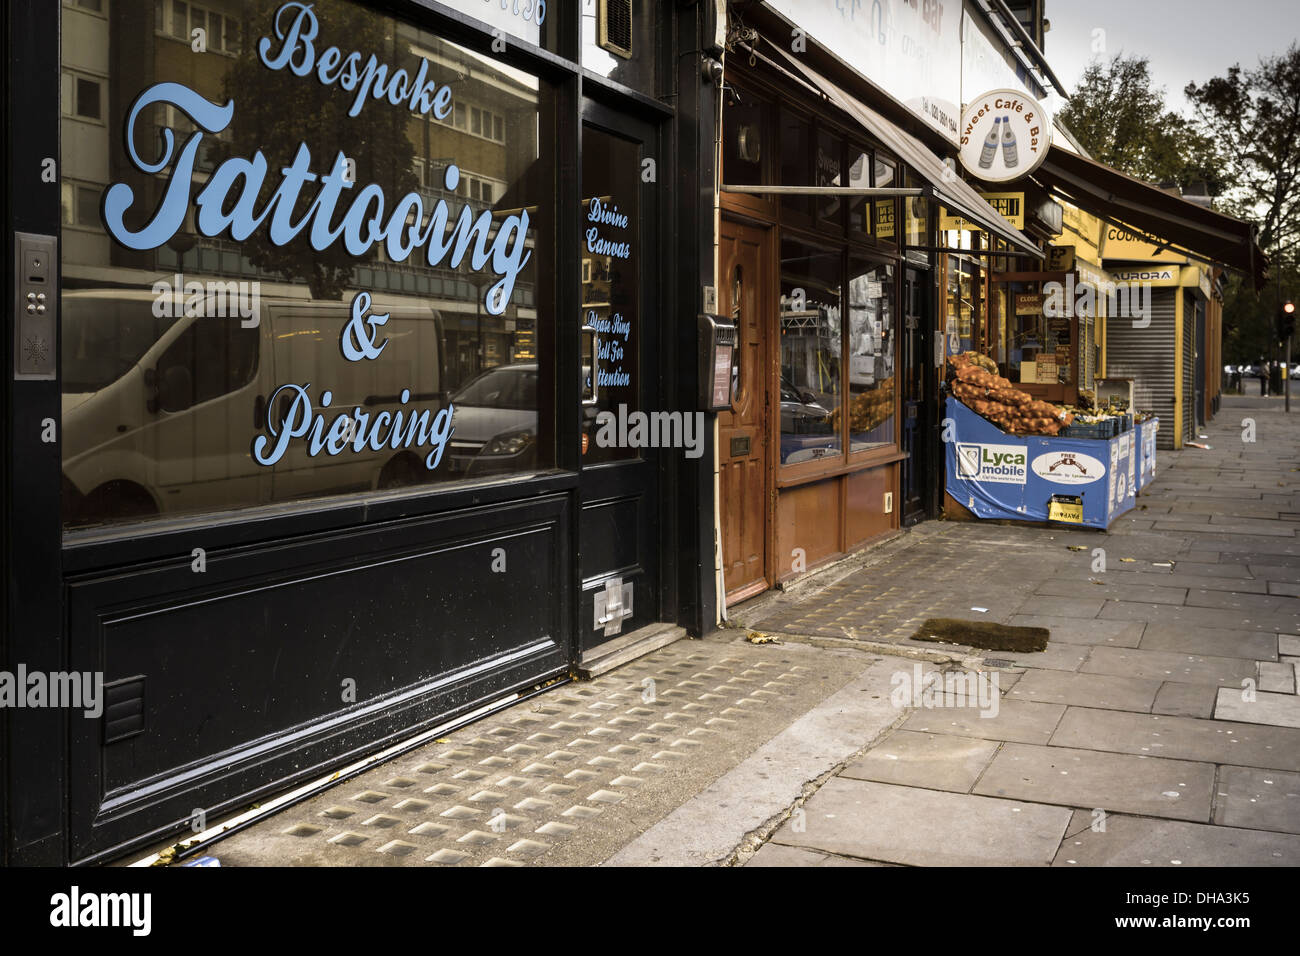 A Tattoo Parlour on the Caledonian Road in Islington, North London, on a Sunday morning in November. Stock Photo